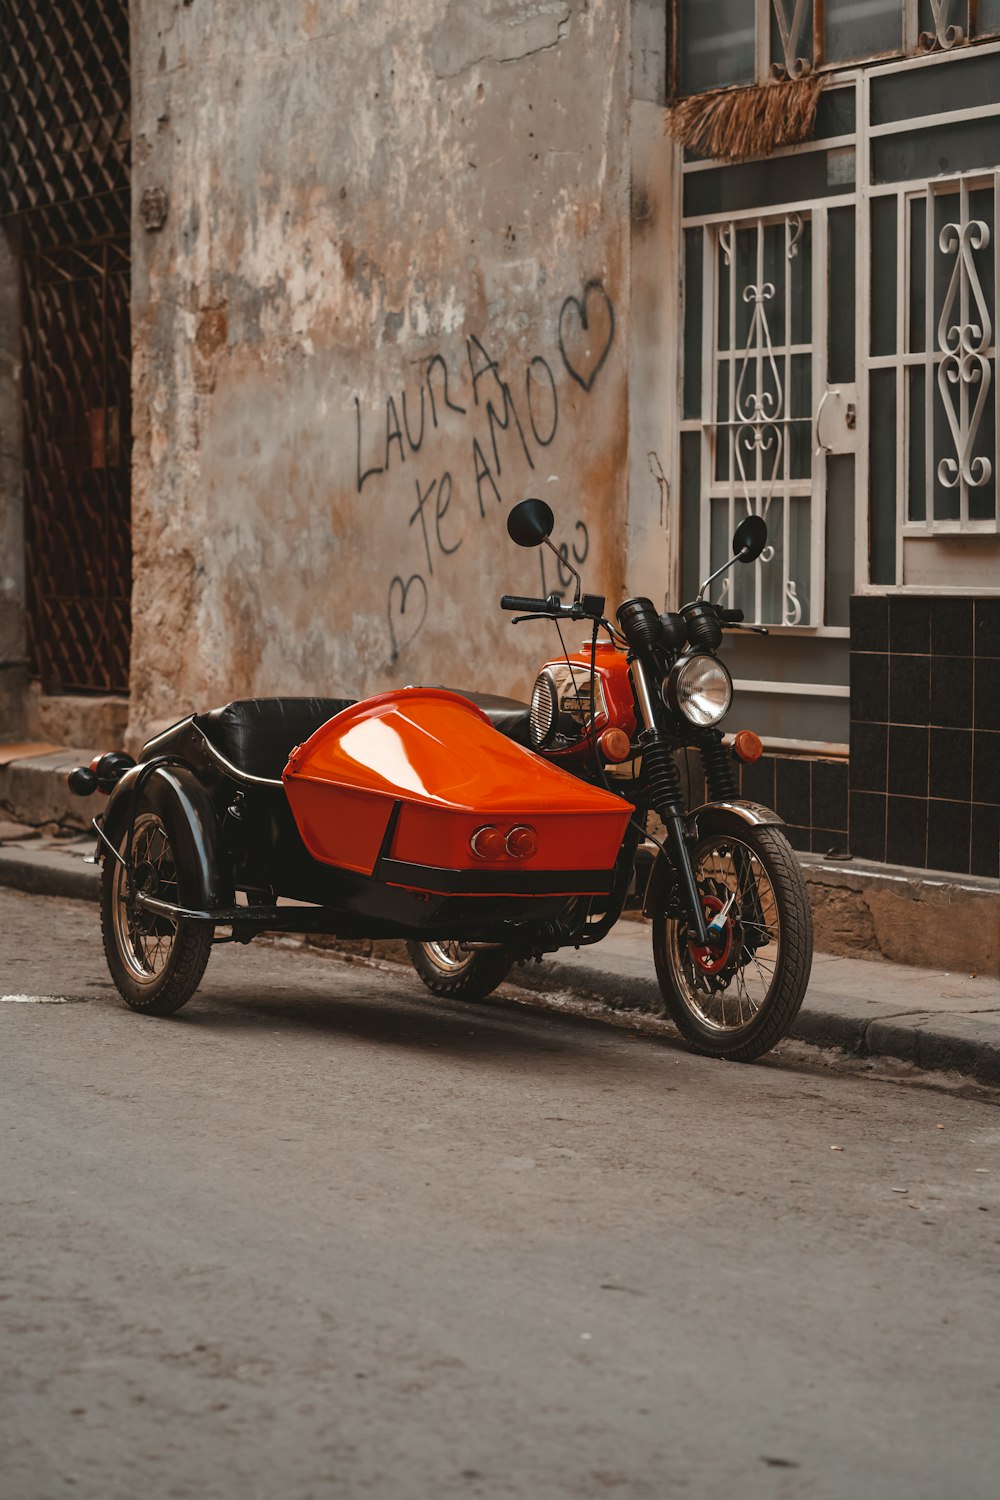 an orange motorcycle parked on the side of the road